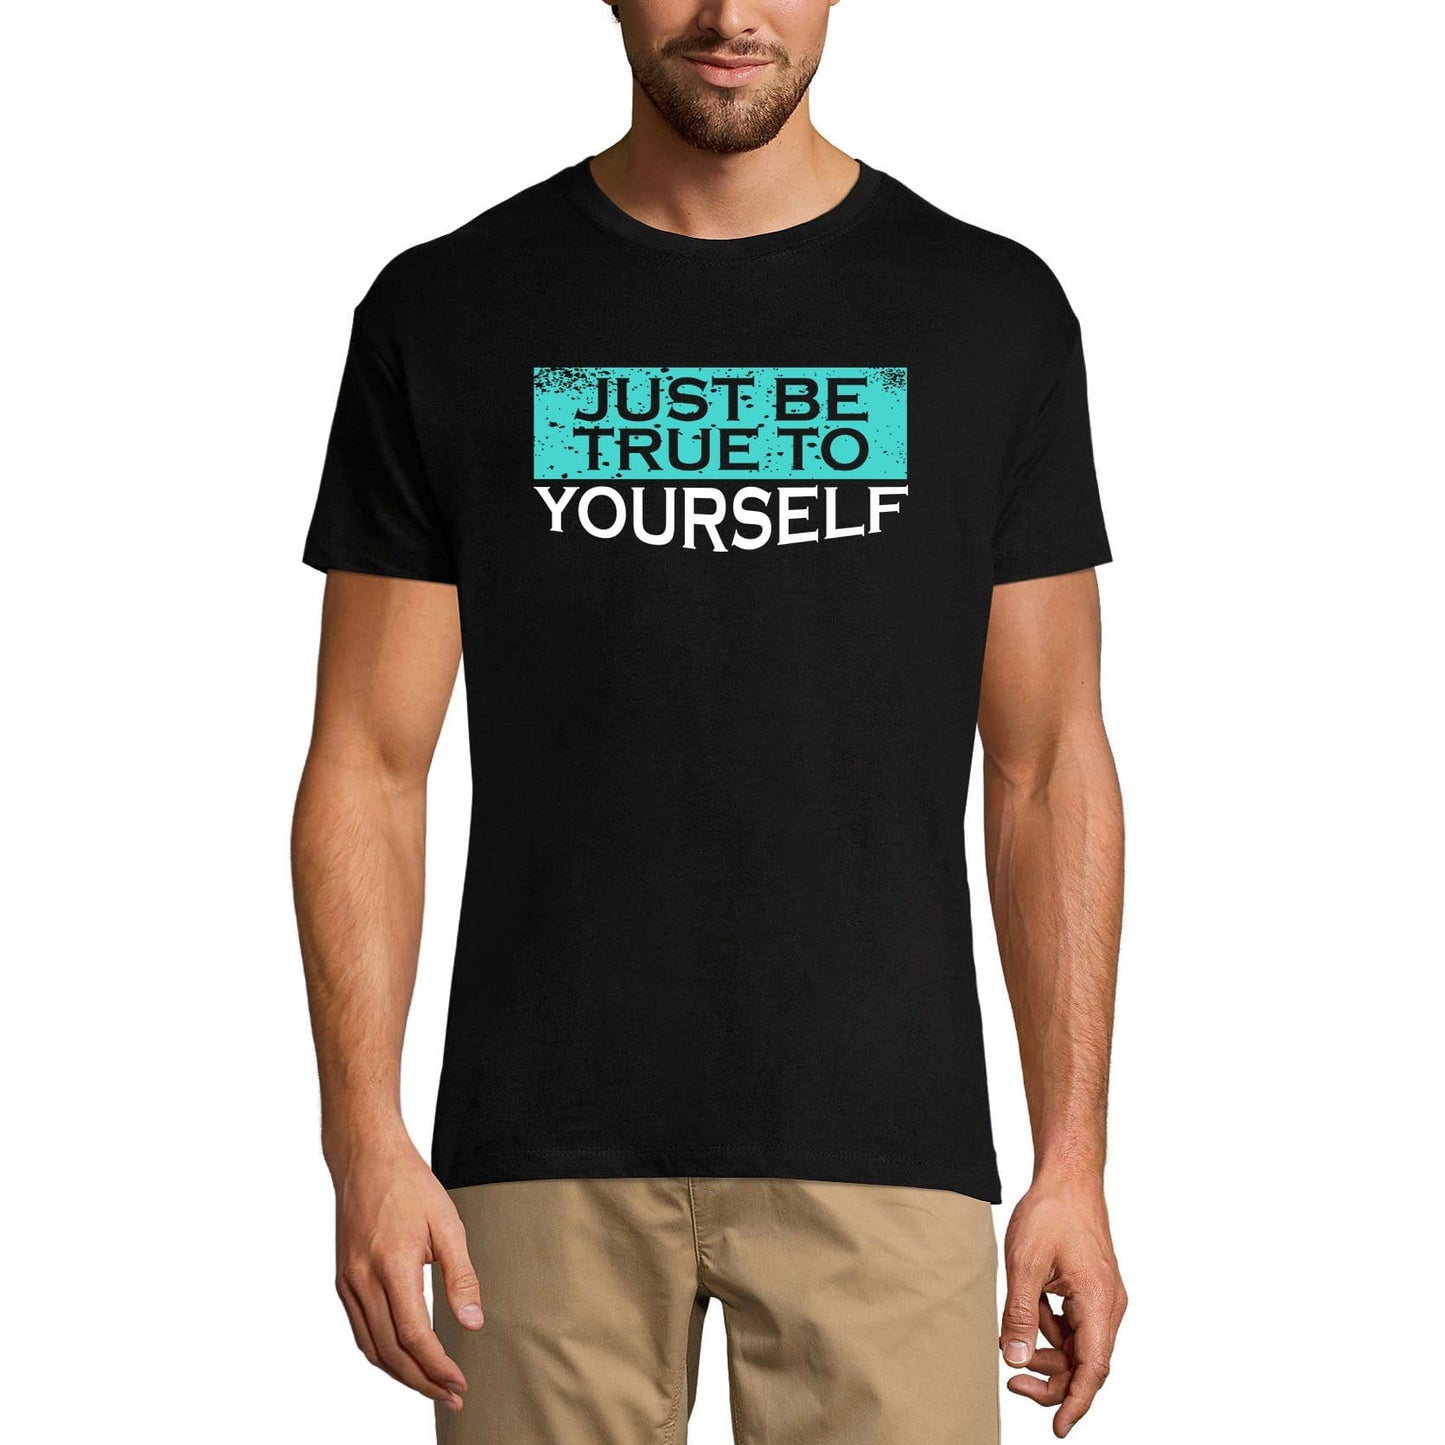 ULTRABASIC Graphic Men's T-Shirt Just Be True To Yourself - Motivational Gift